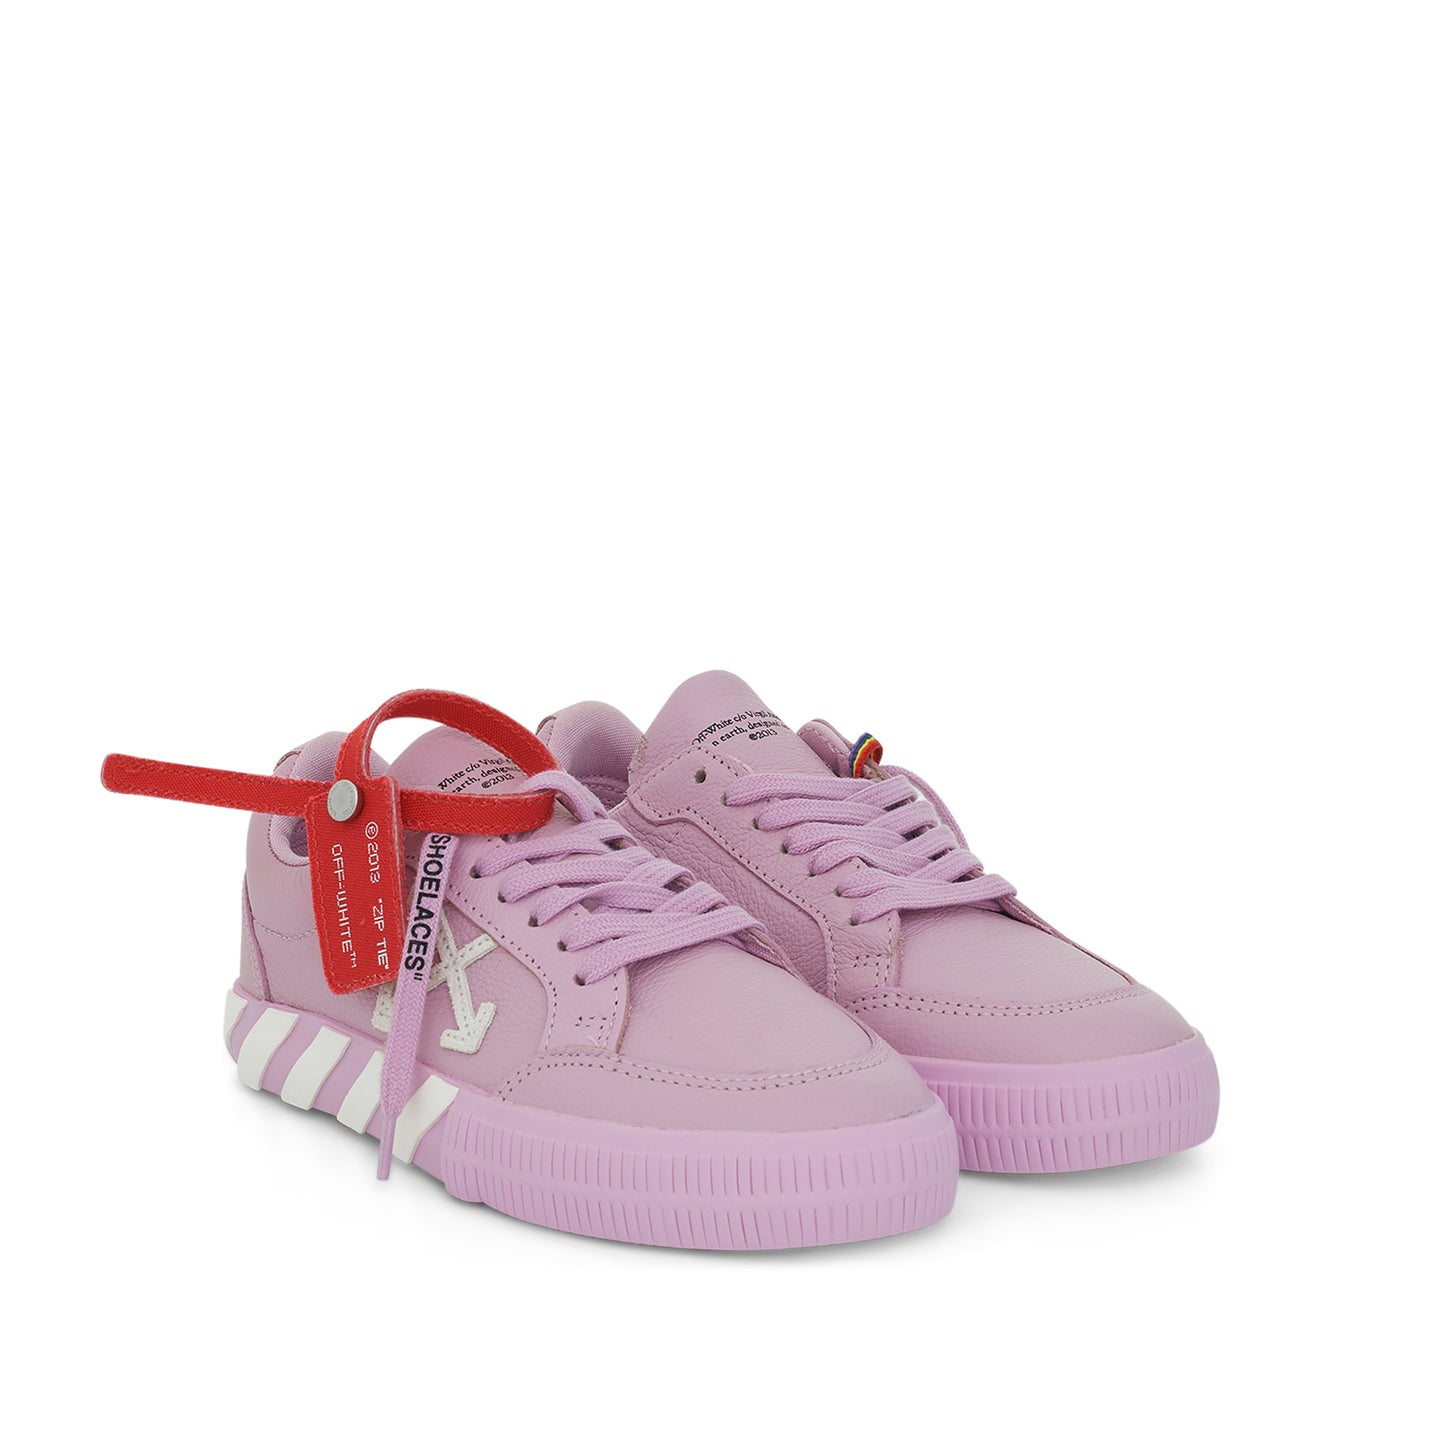 Vulcanized Lace Up Sneaker in Pink/White